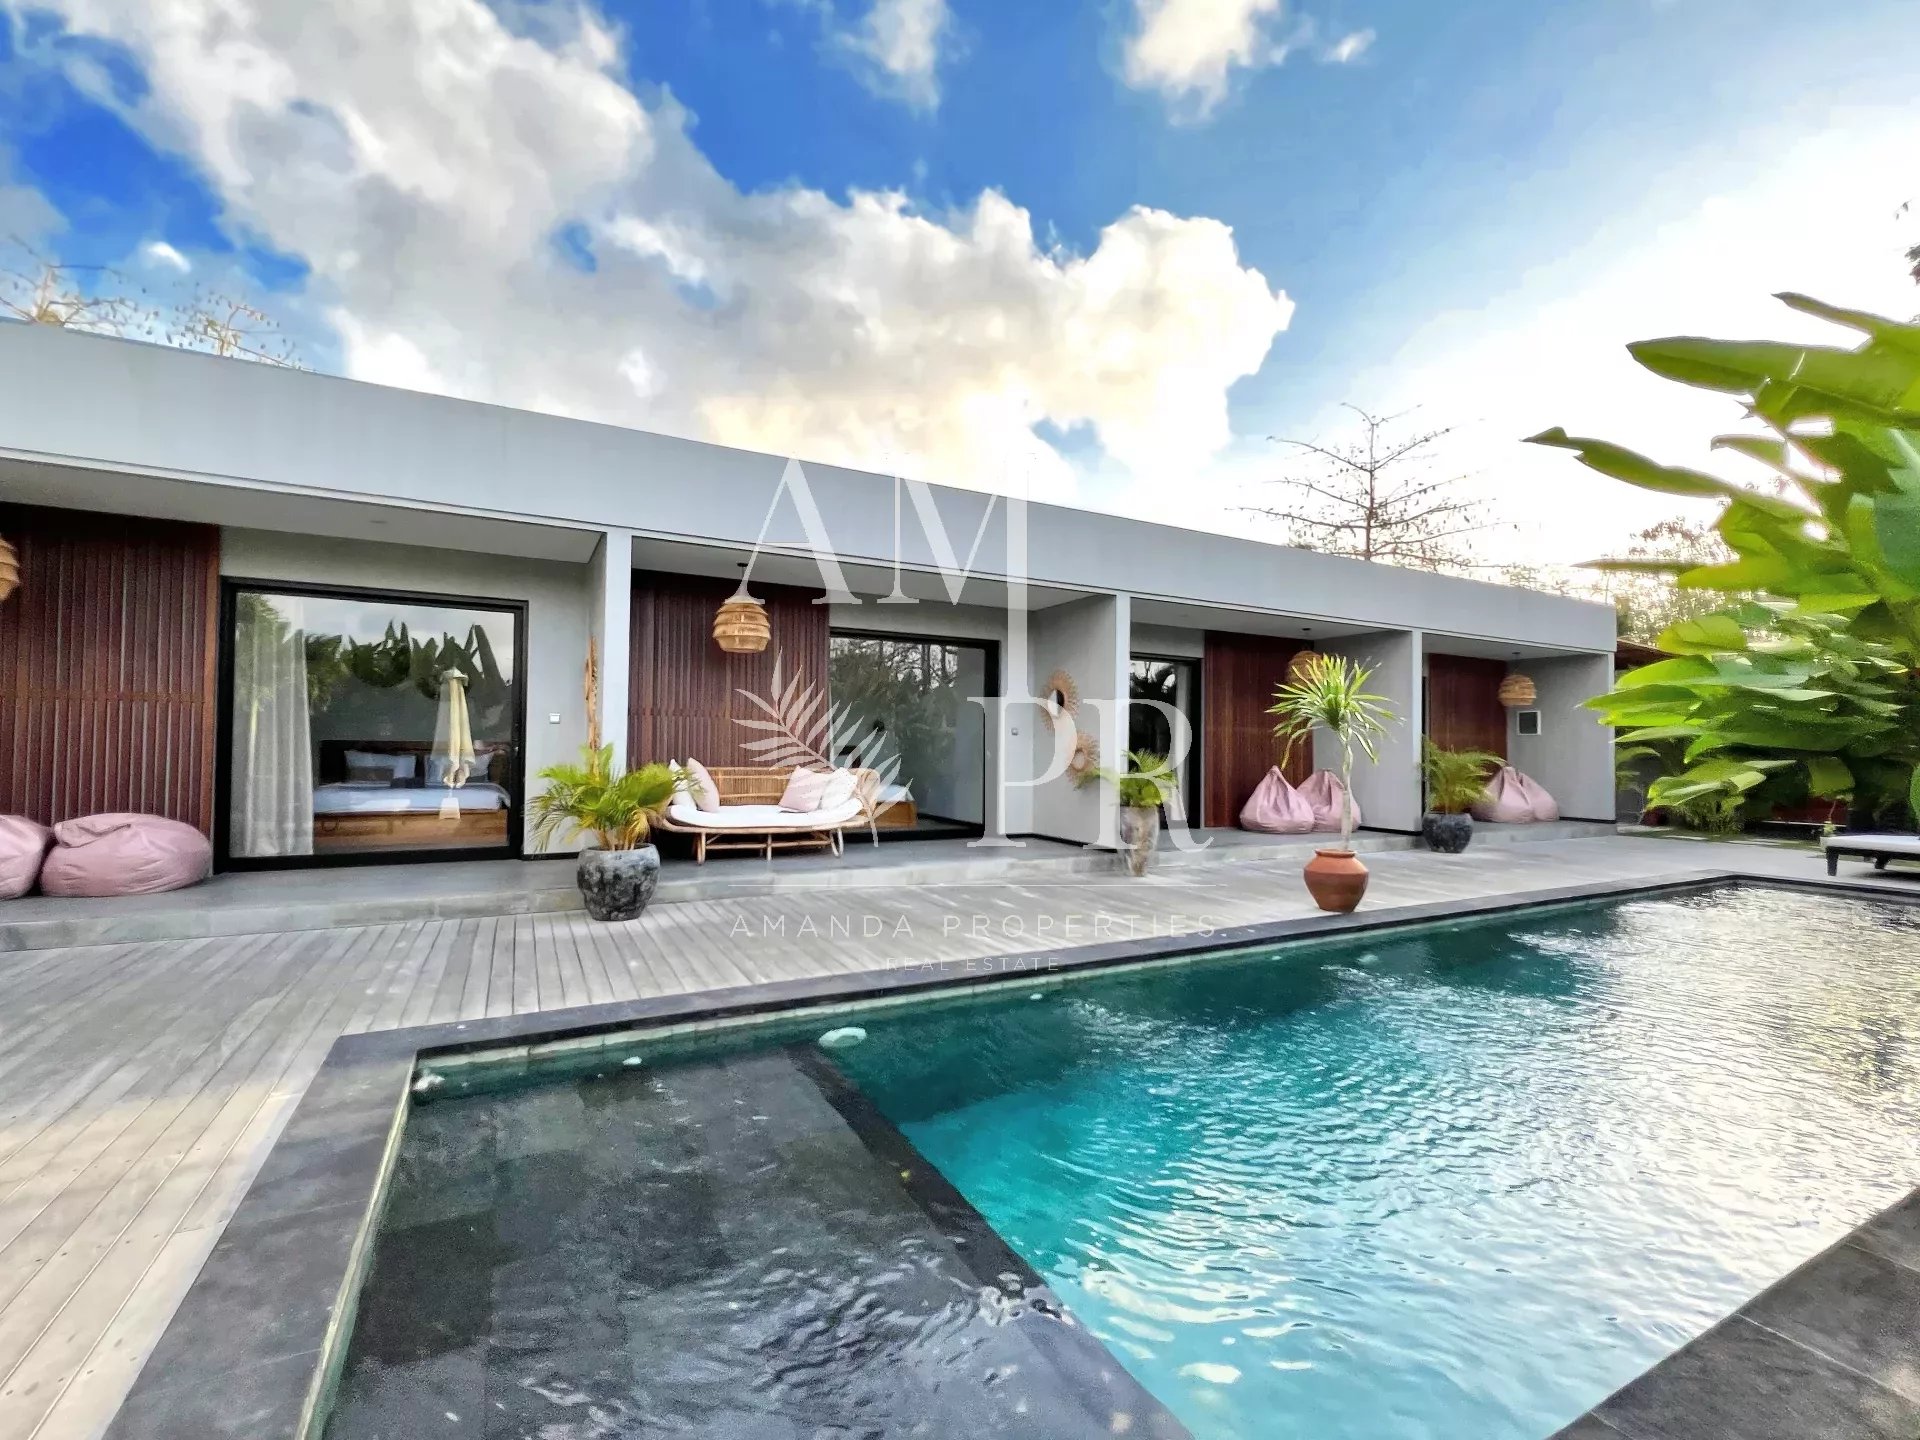 Villa with 4 Bedroom & Pool - Your paradise in Bali